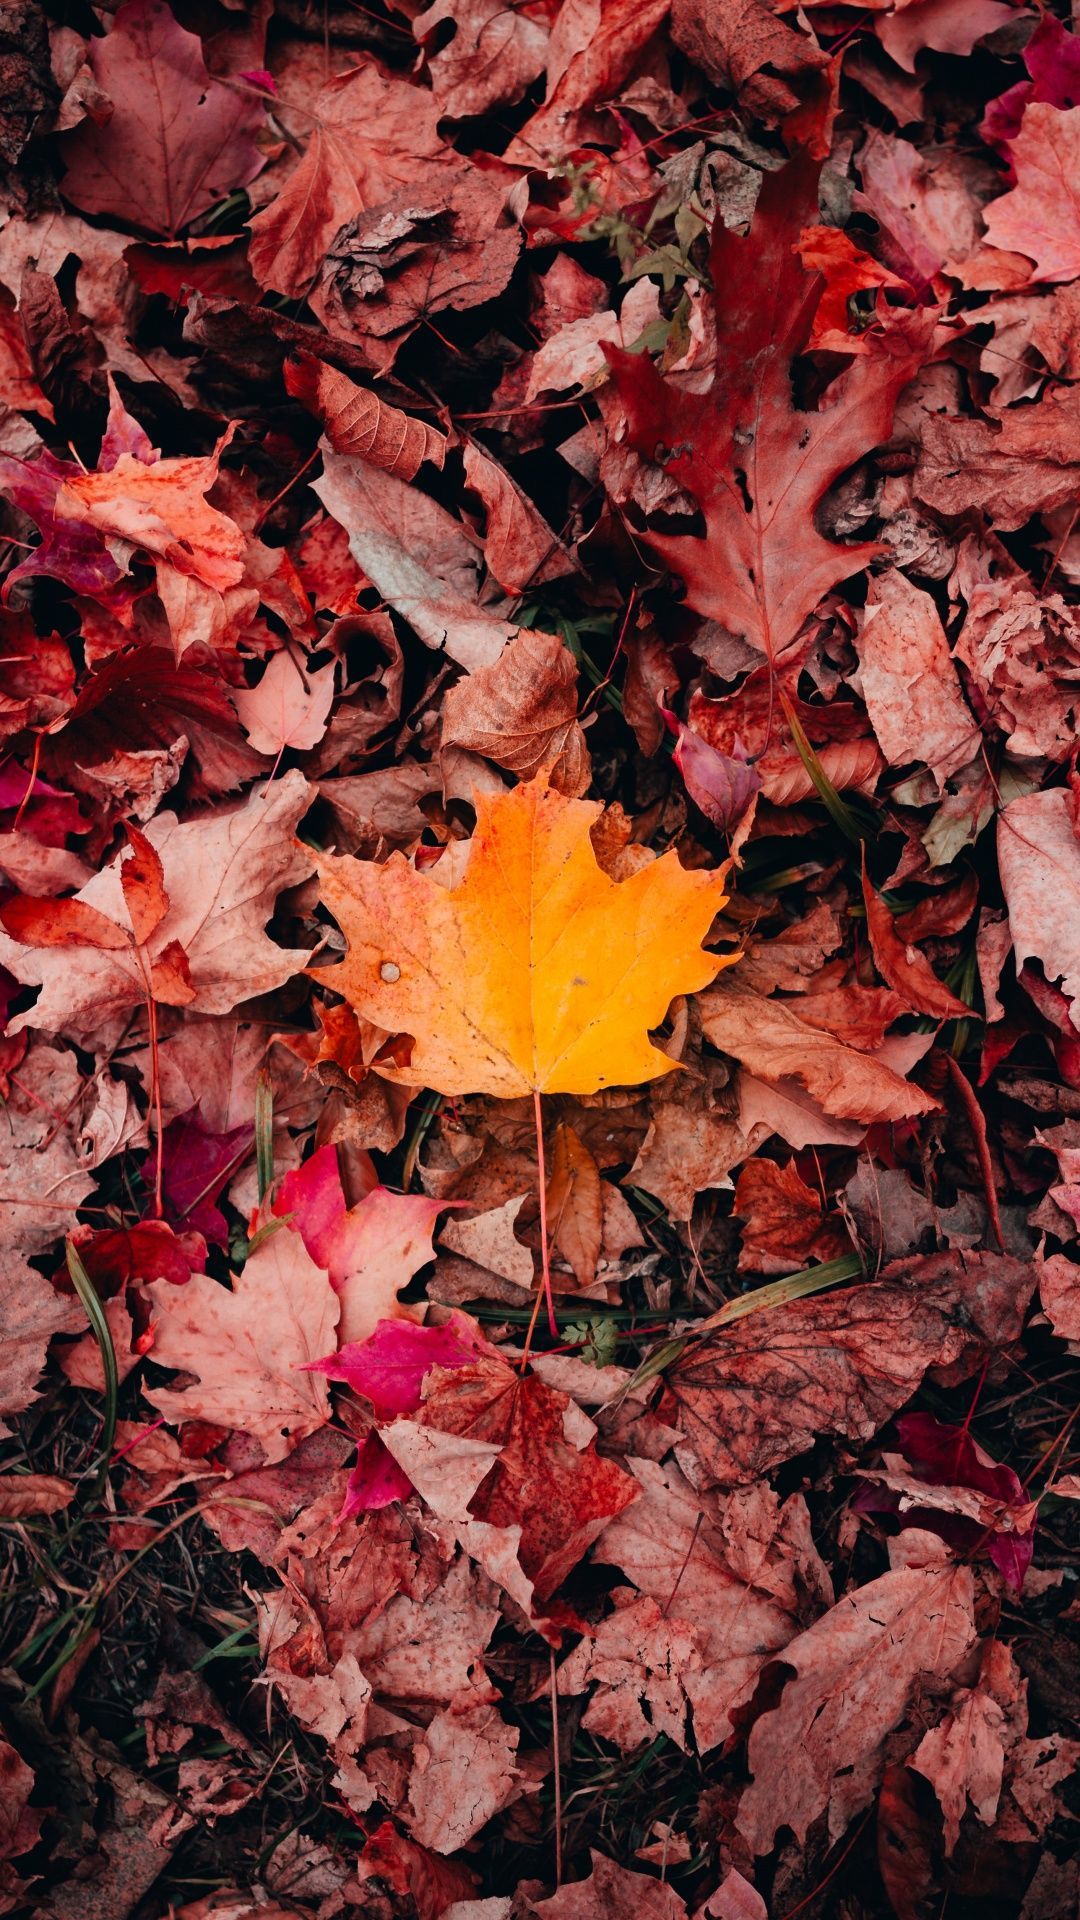 IPhone wallpaper of a yellow leaf on the ground surrounded by red leaves. - Fall iPhone